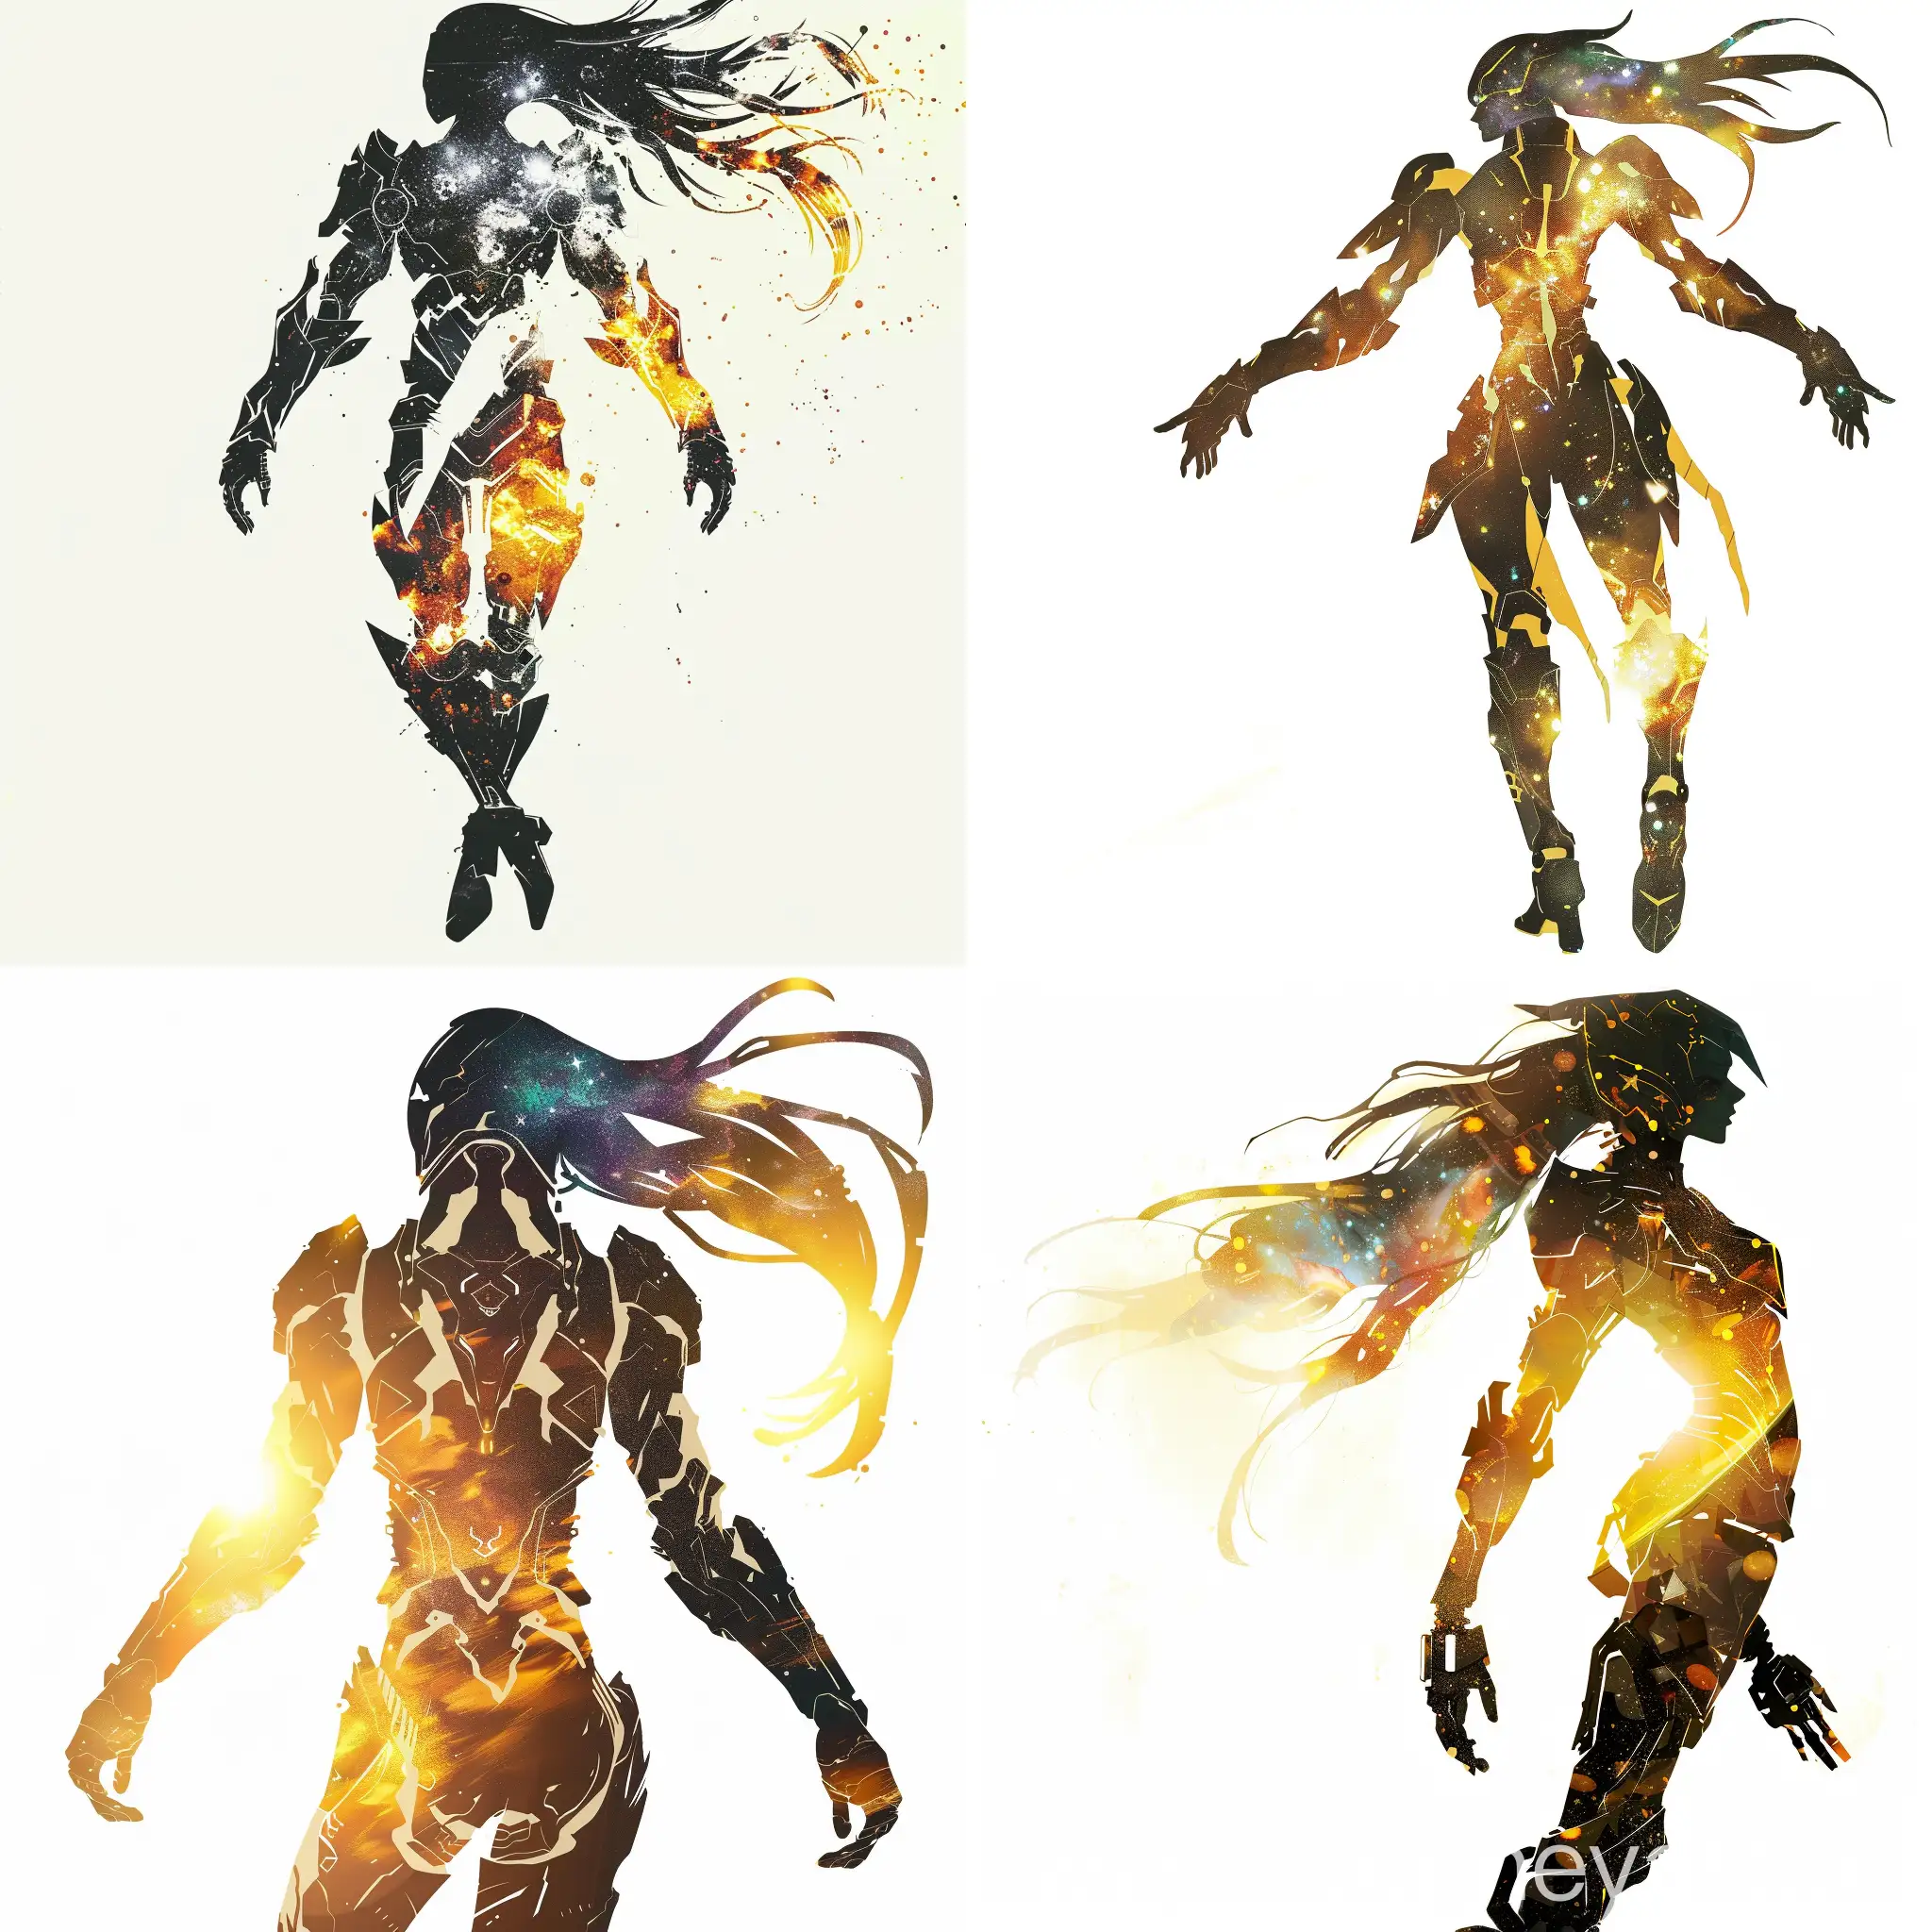 analog button of mobile moba game, there is a silhouette of a person in armor with two arms sketching to the side, the person has long galaxy hair, conceptual , dancing, mechanical shinigami, robot, futuristic design, slender, silhouette, plain white background, light yellow silhouette